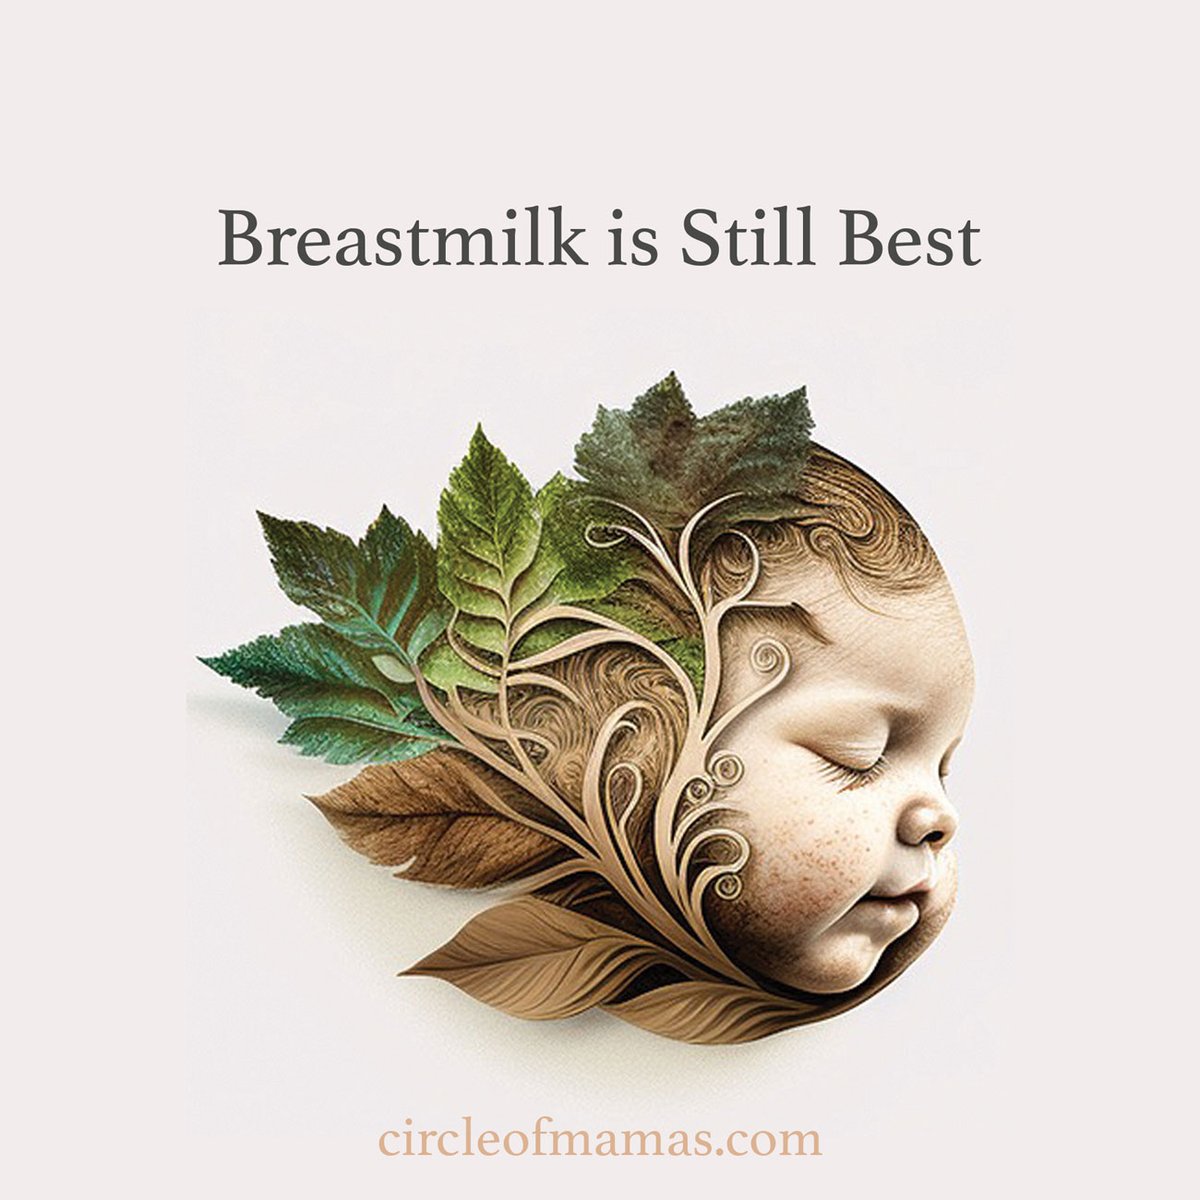 Not trying to shame, but breastmilk is literally the most nutritious food a baby could consume. We need to bring it back into our cultural heritage, it's an ancient and wise tradition. circleofmamas.com/health-news/th…